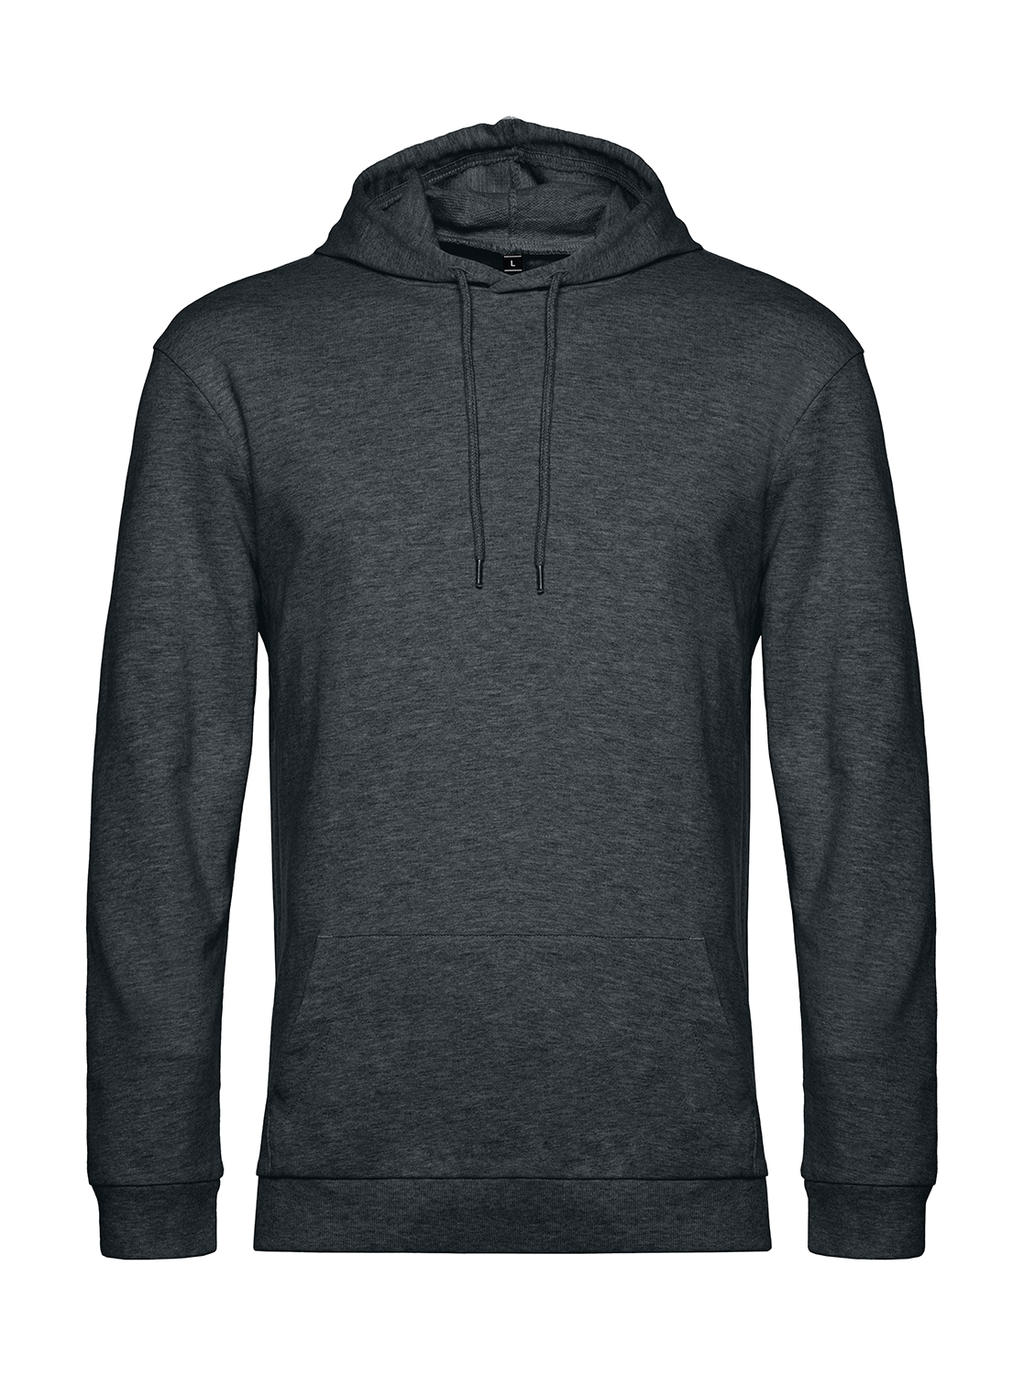  #Hoodie French Terry in Farbe Heather Asphalt